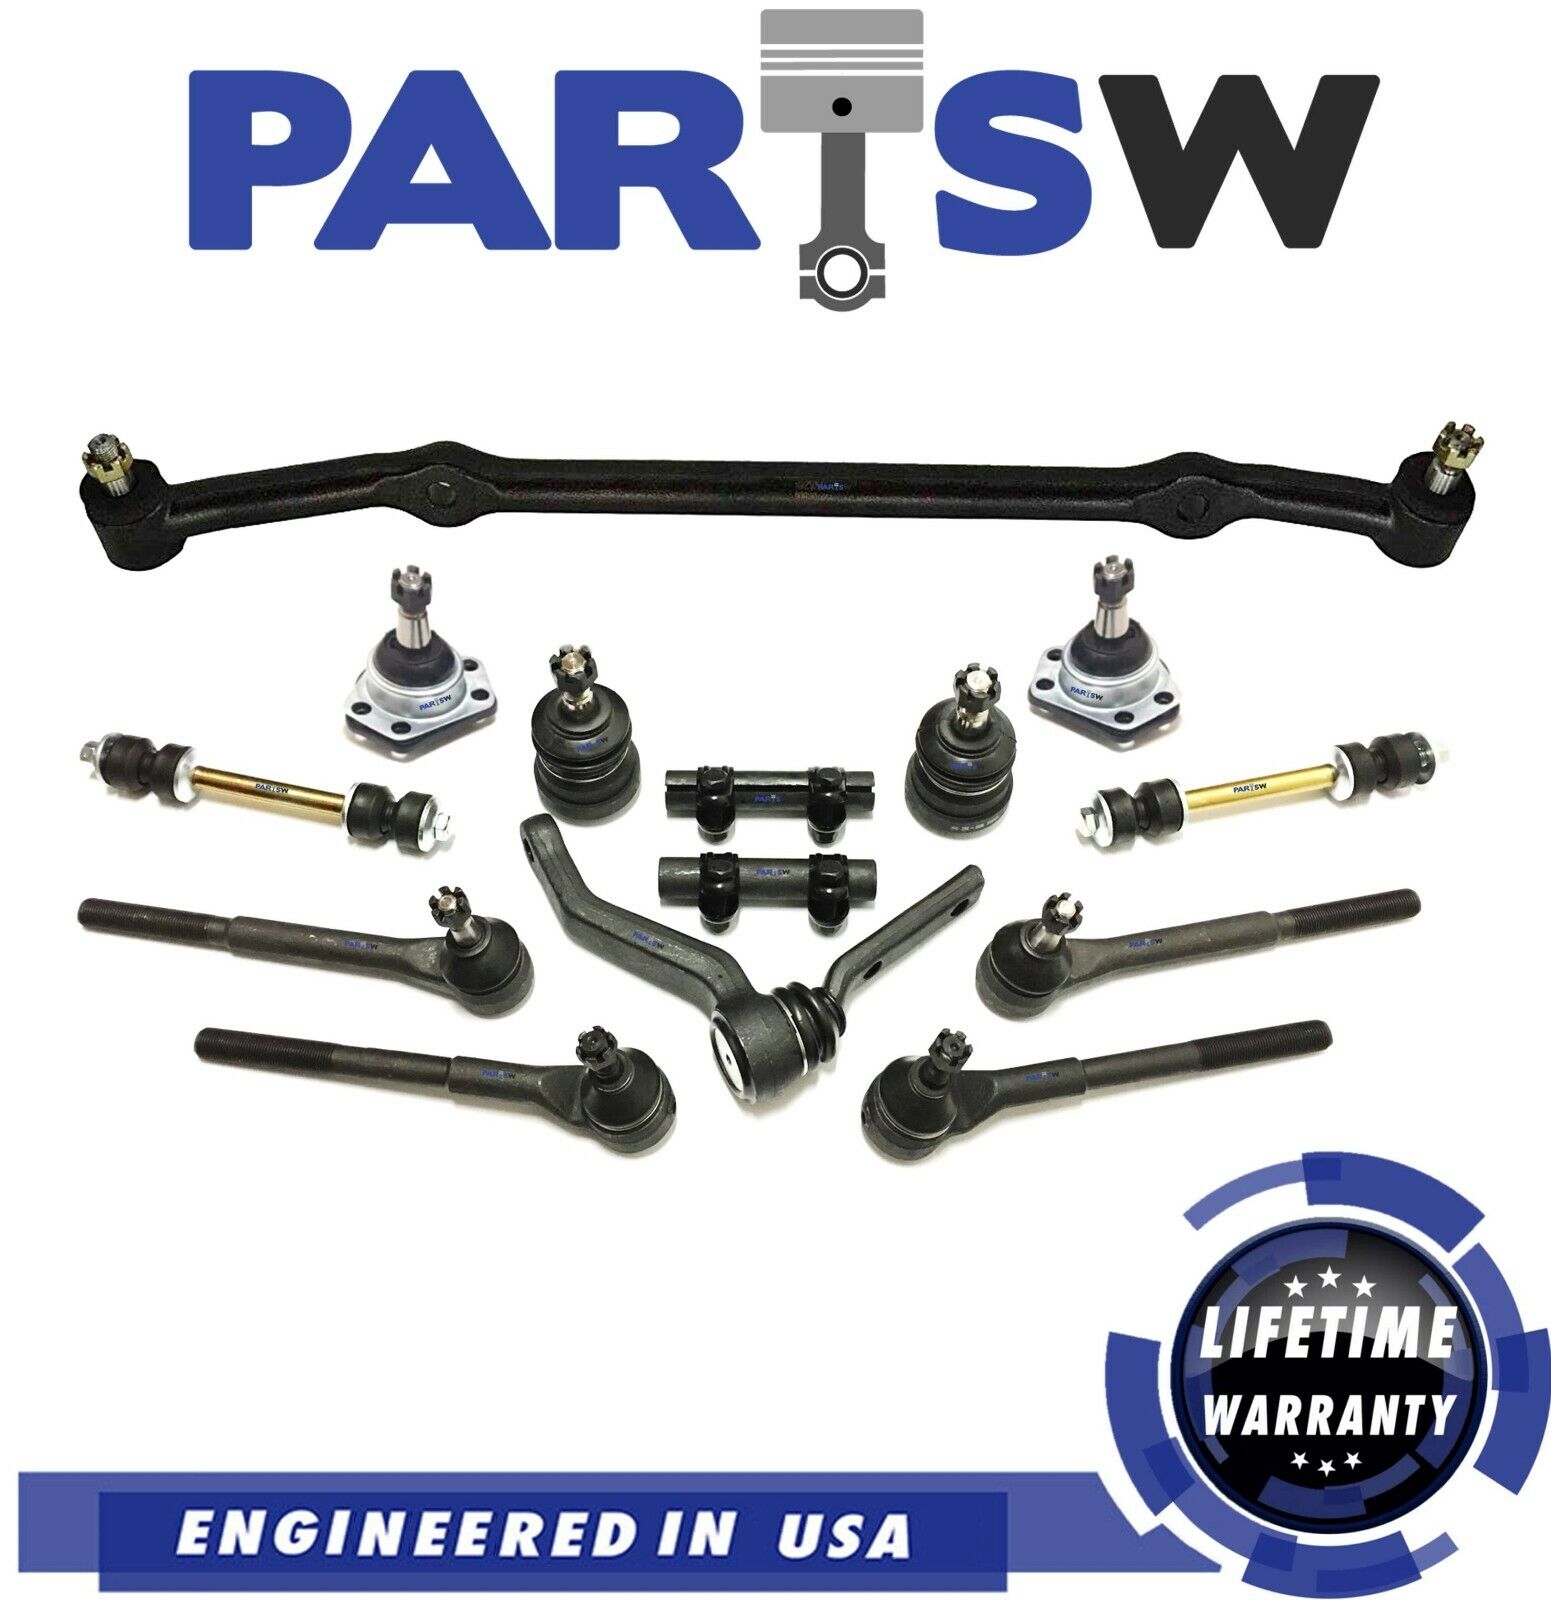 NEW 14 Pc Complete Front Suspension Kit for Chevrolet Pontiac Oldsmobile Buick